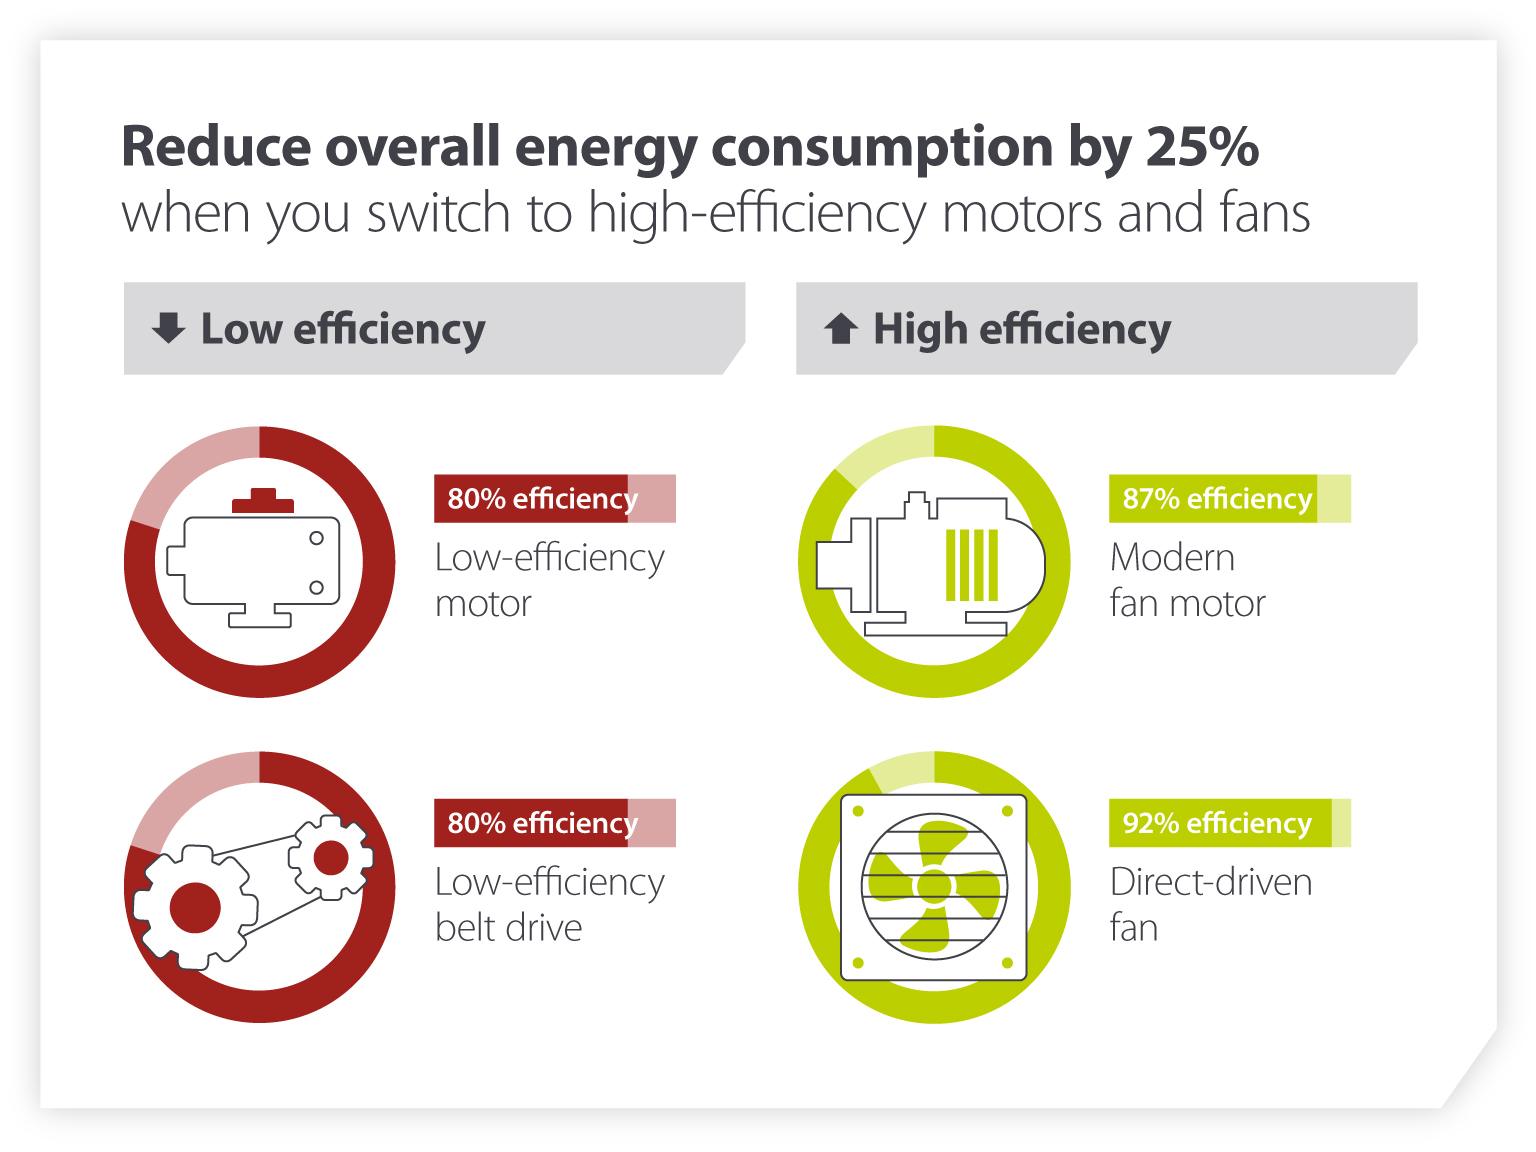 Reduce overall energy consumption by 25%